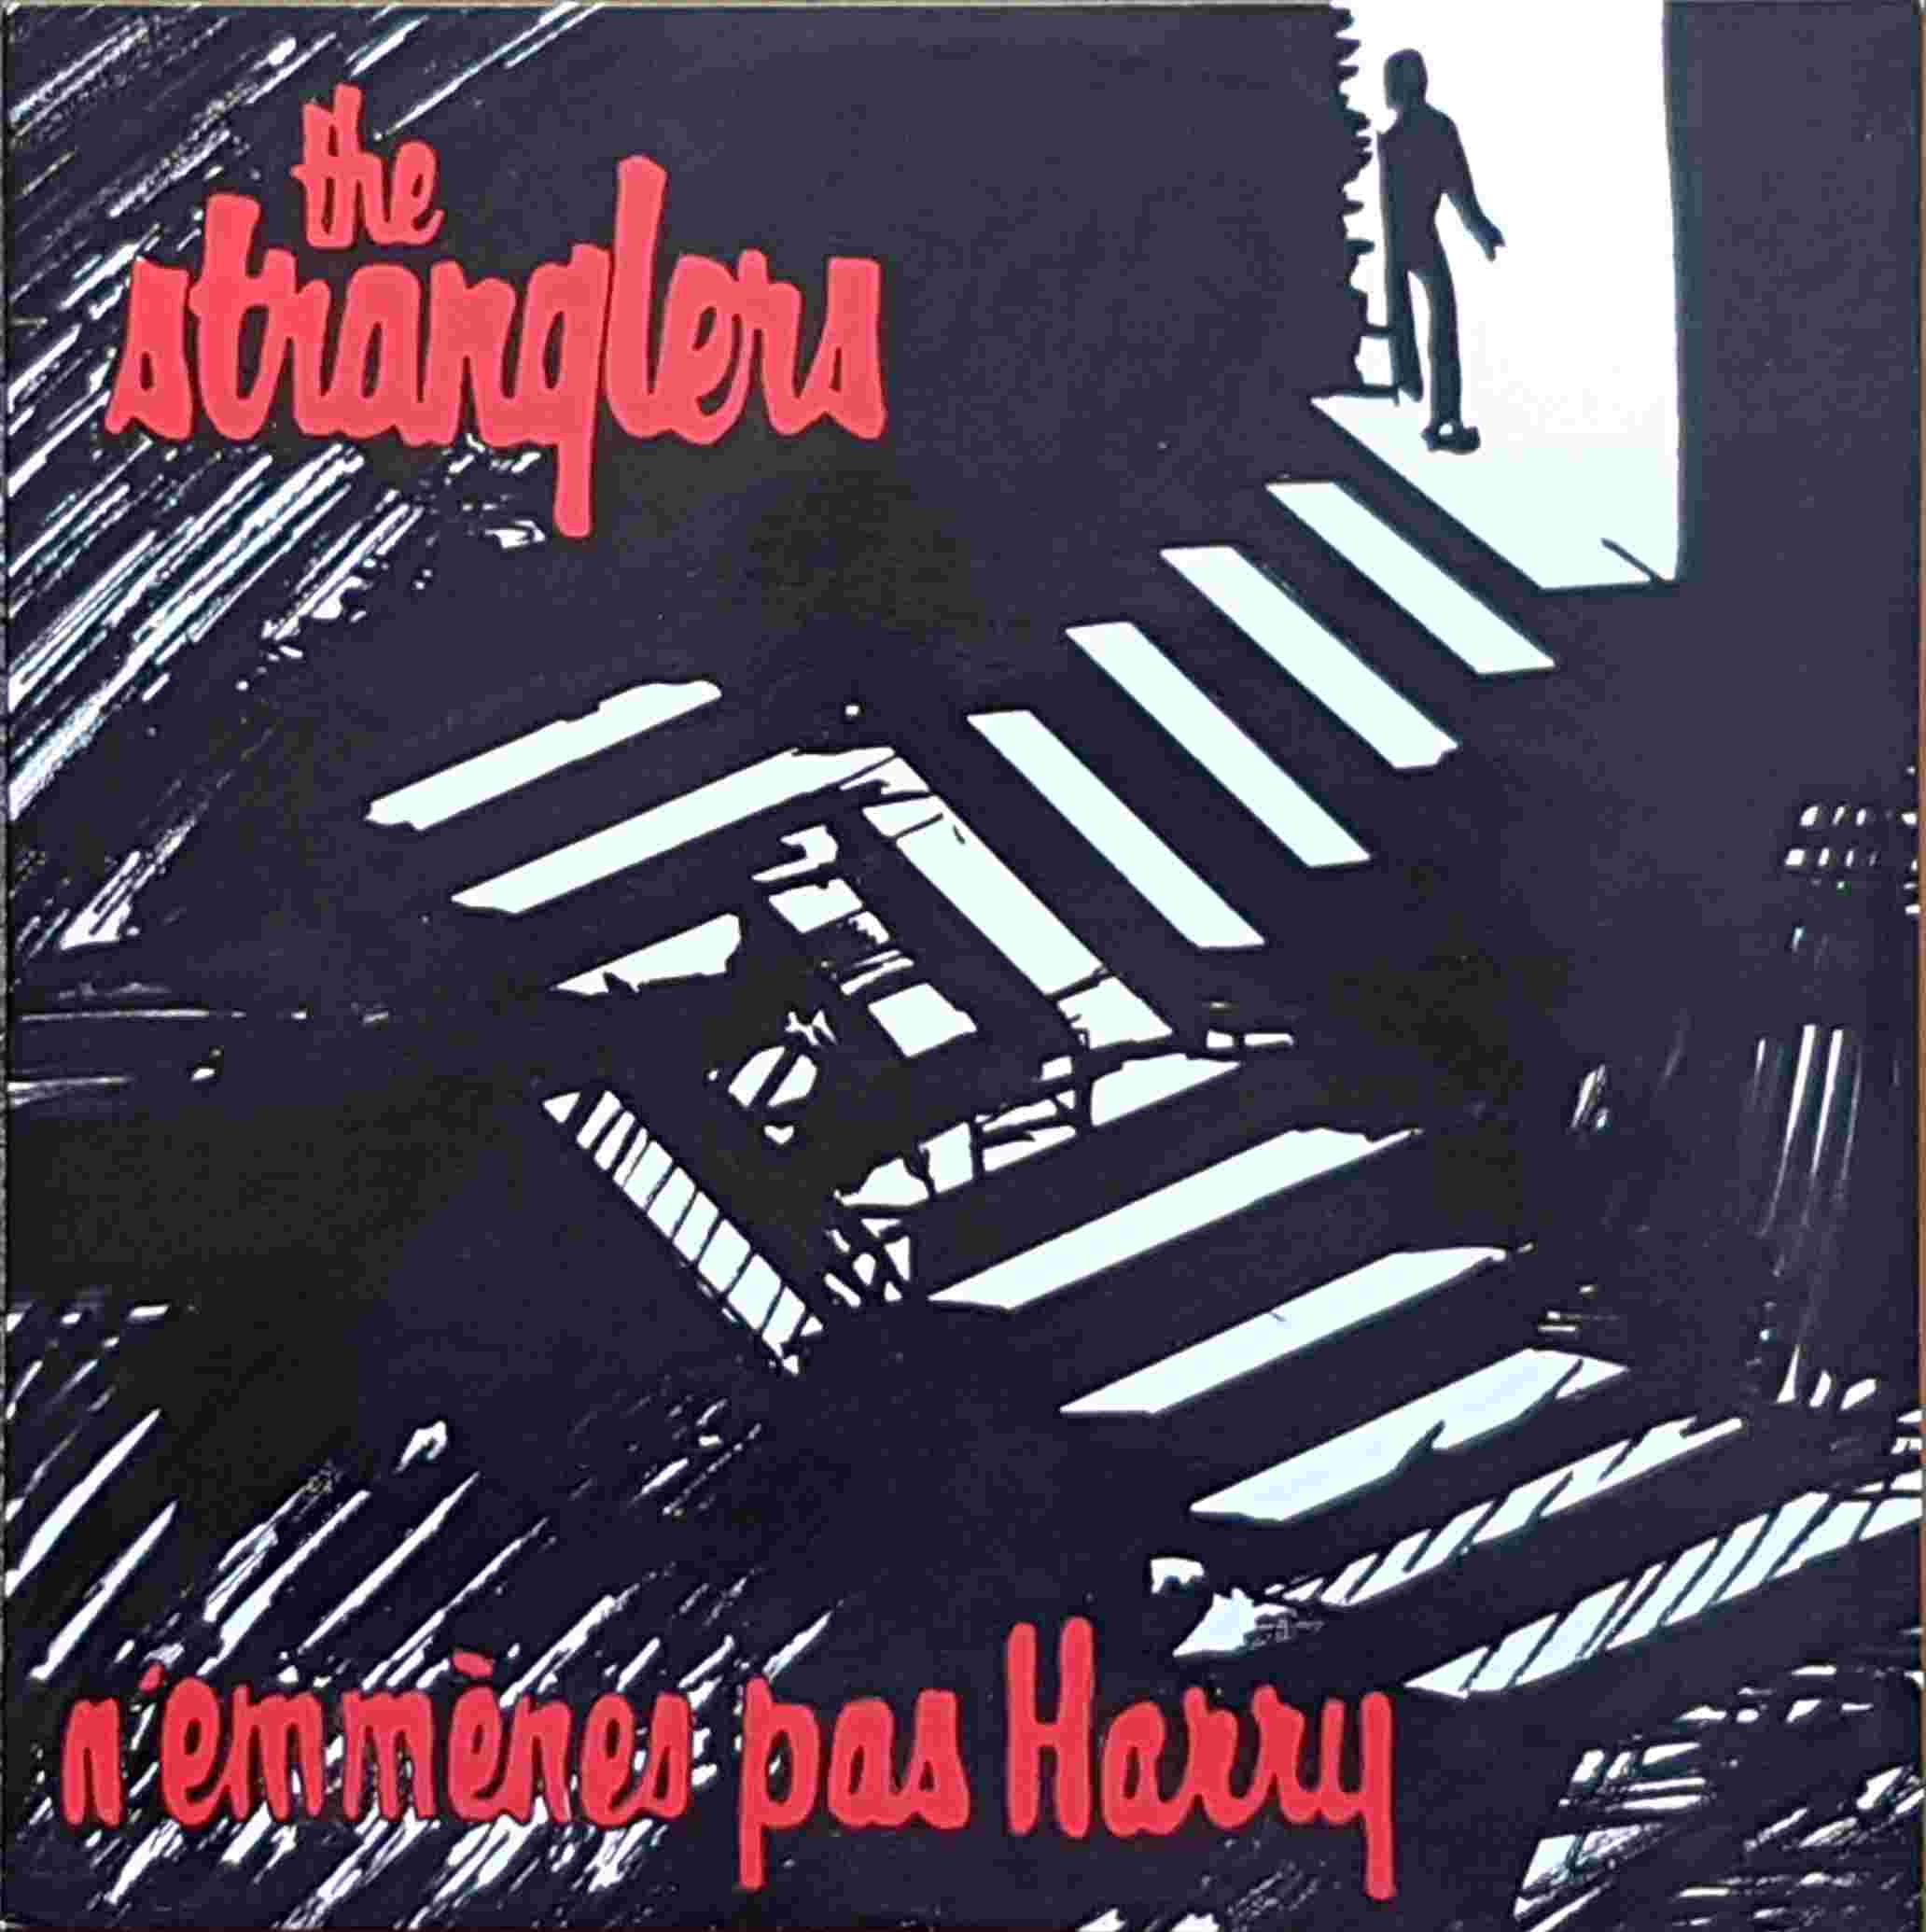 Picture of N'emmenes pas Harry by artist The Stranglers  from The Stranglers 12inches